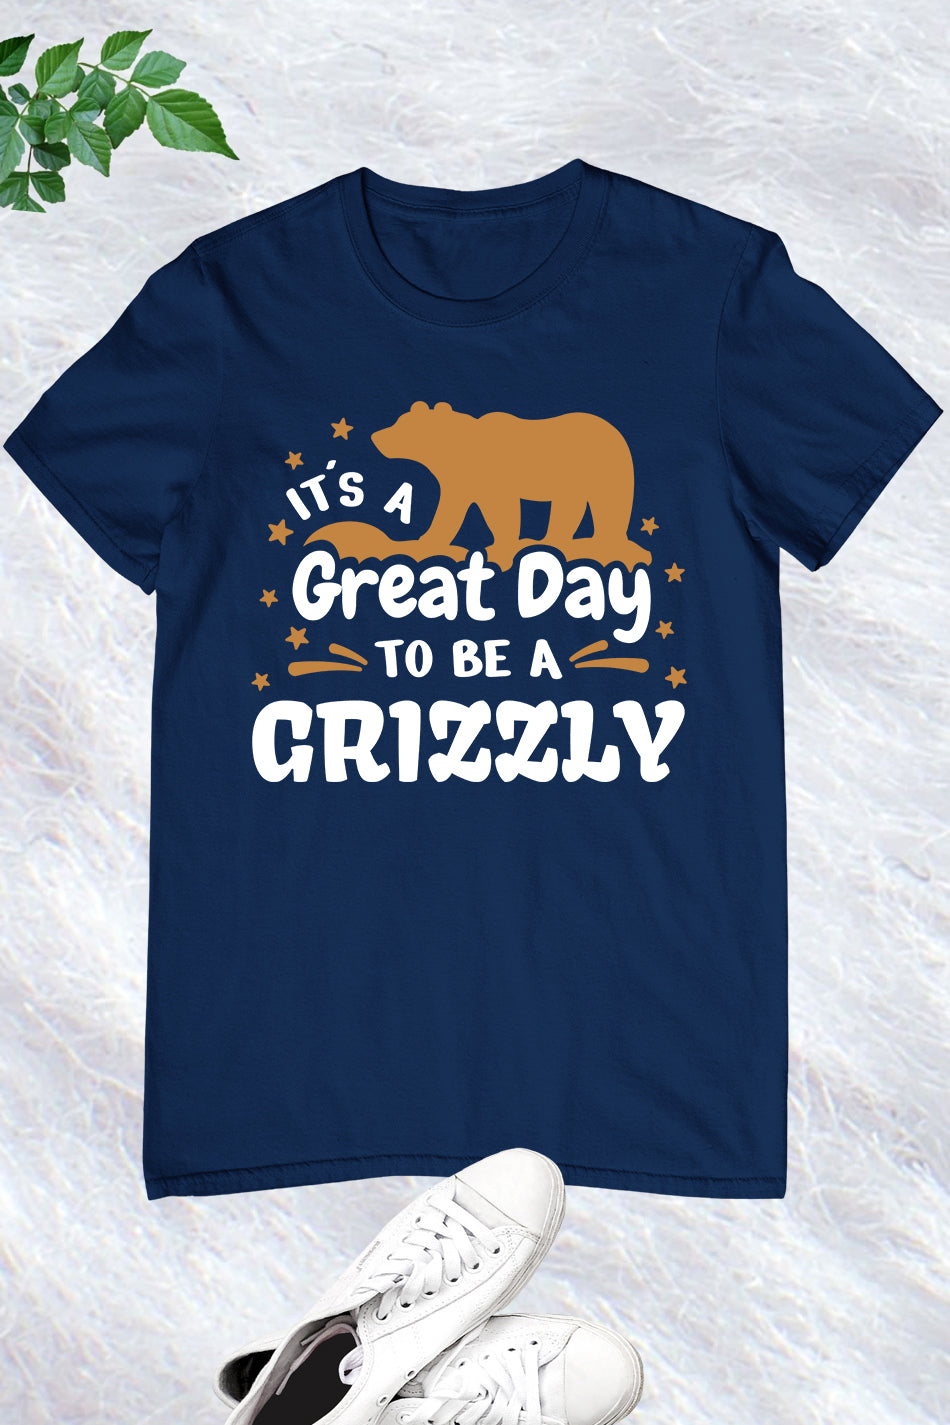 It's a Great Day to Be a Grizzly Bear Shirt